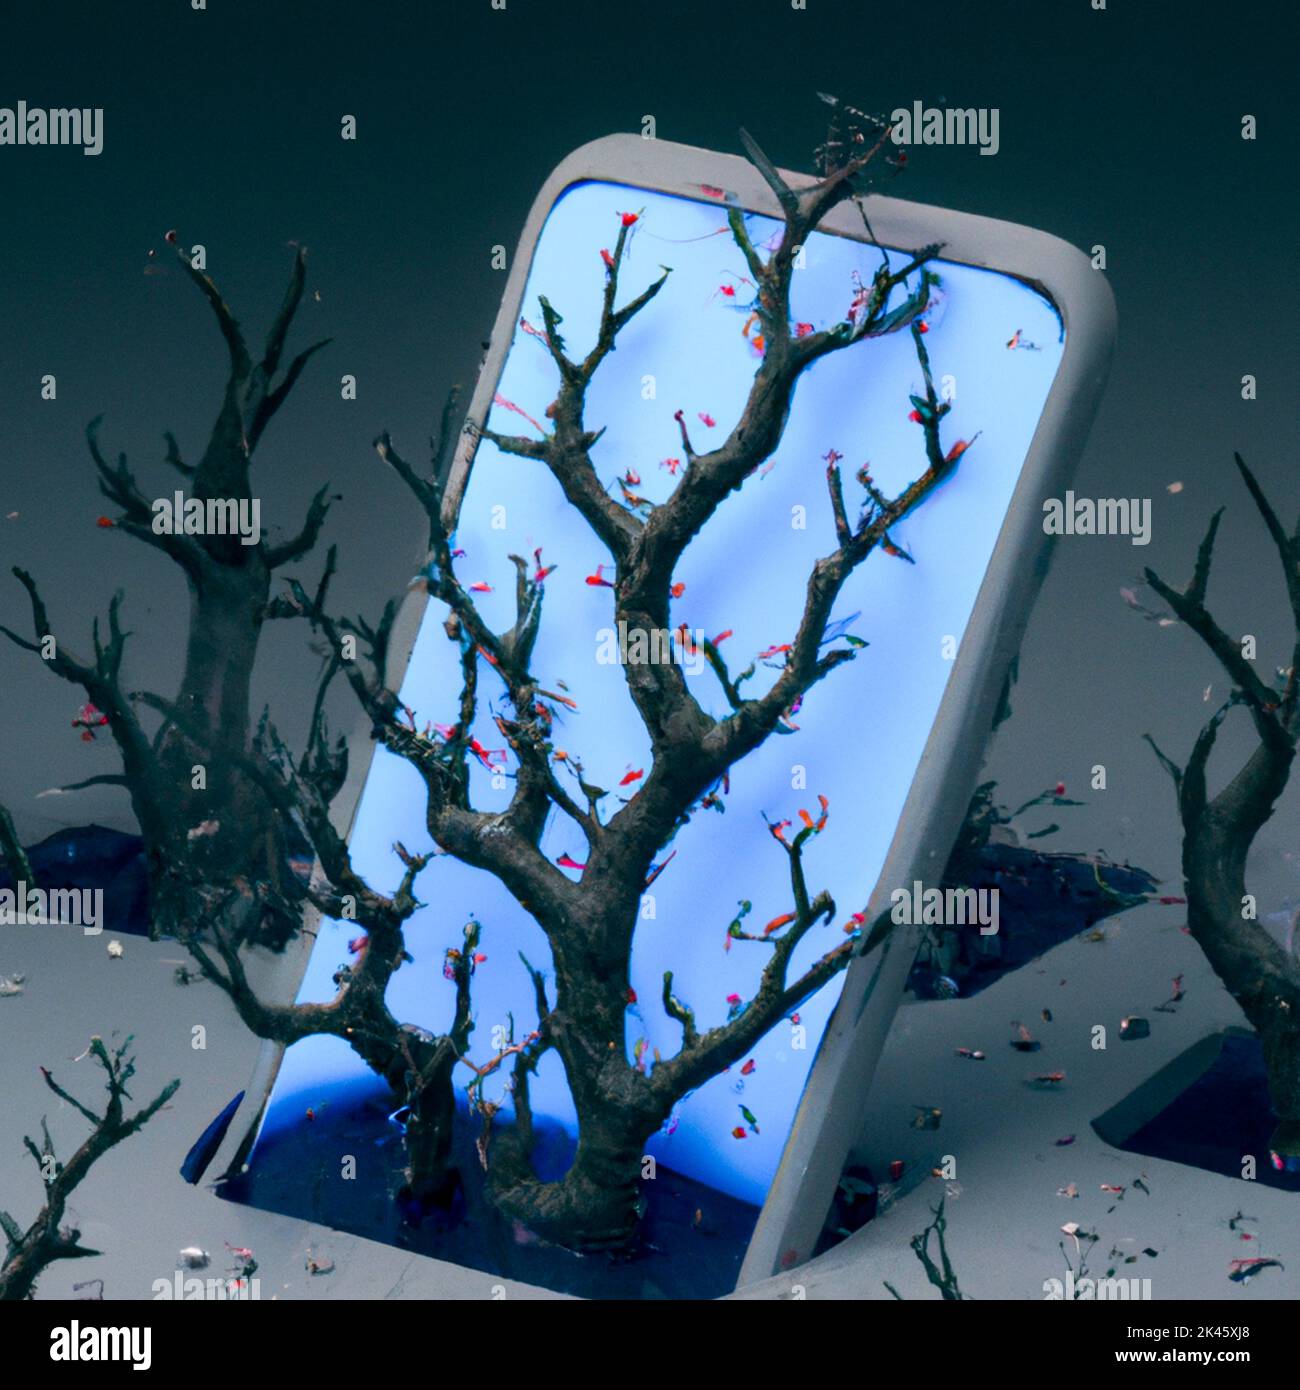 France, Paris on 26/09/2022. Digital illustration of a smartphone growing in a tree evoking the link between nature and technology. Image created usin Stock Photo